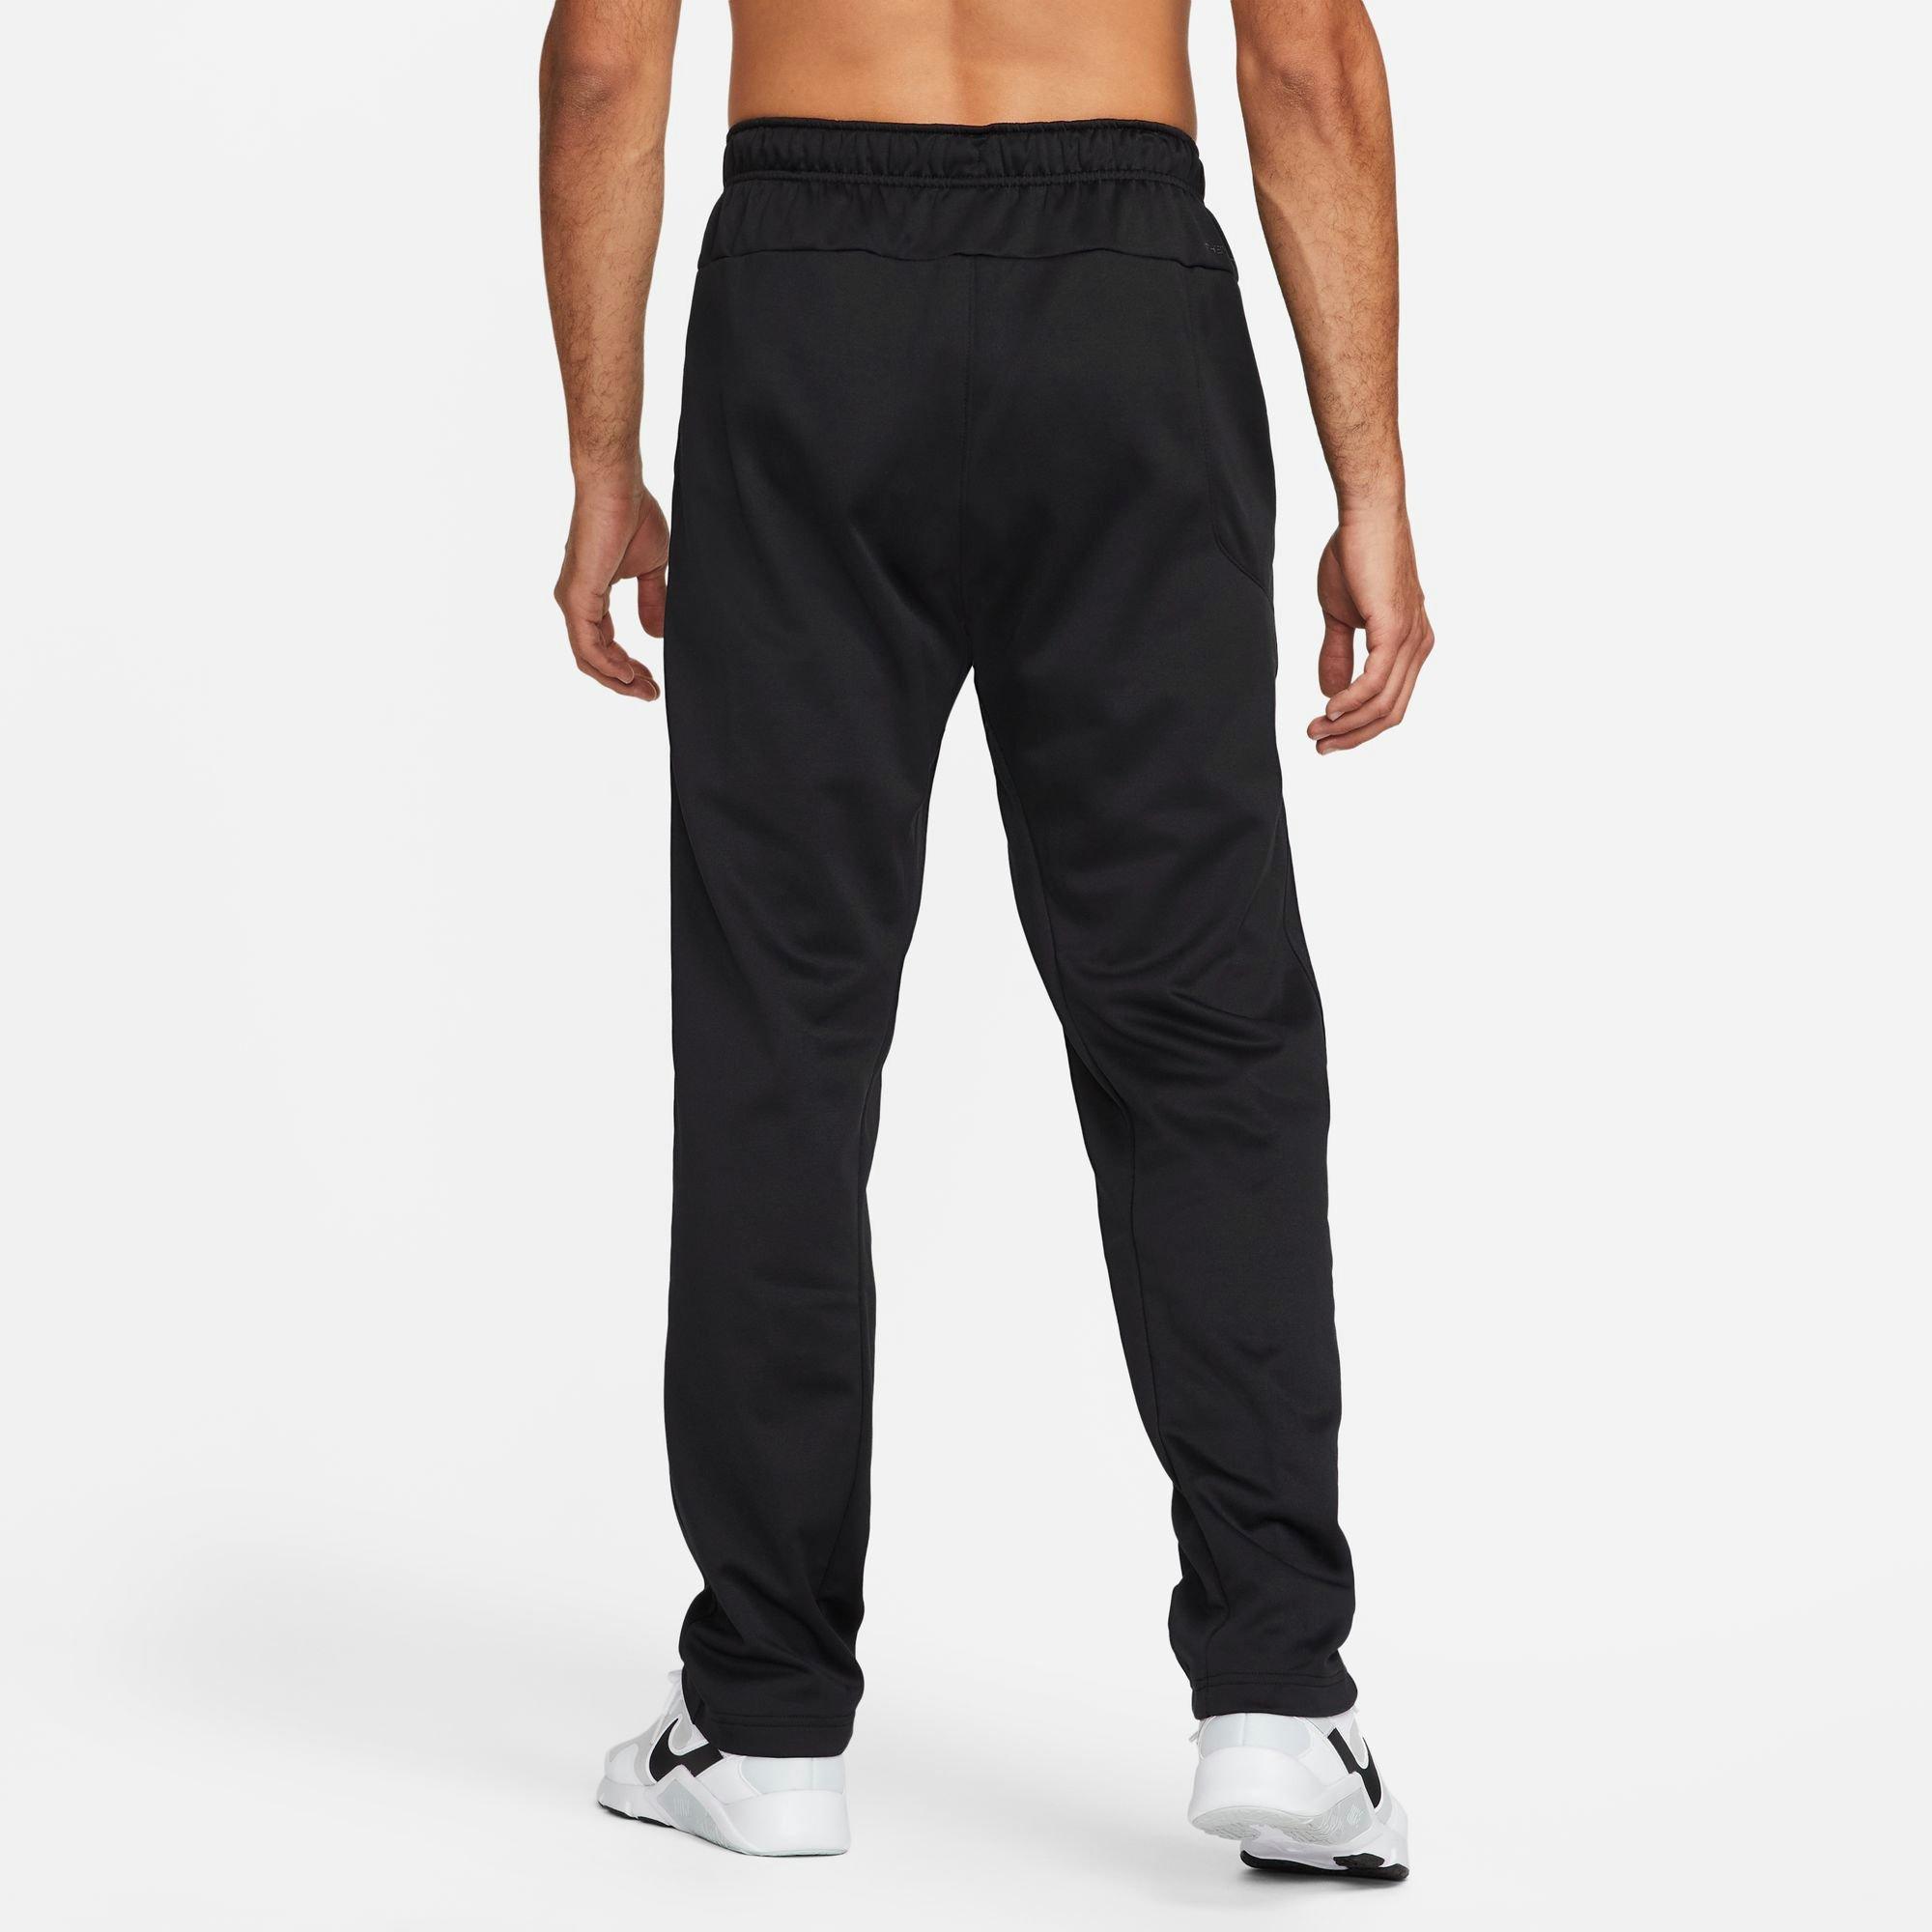 Men's Therma-Fit Pant from Nike